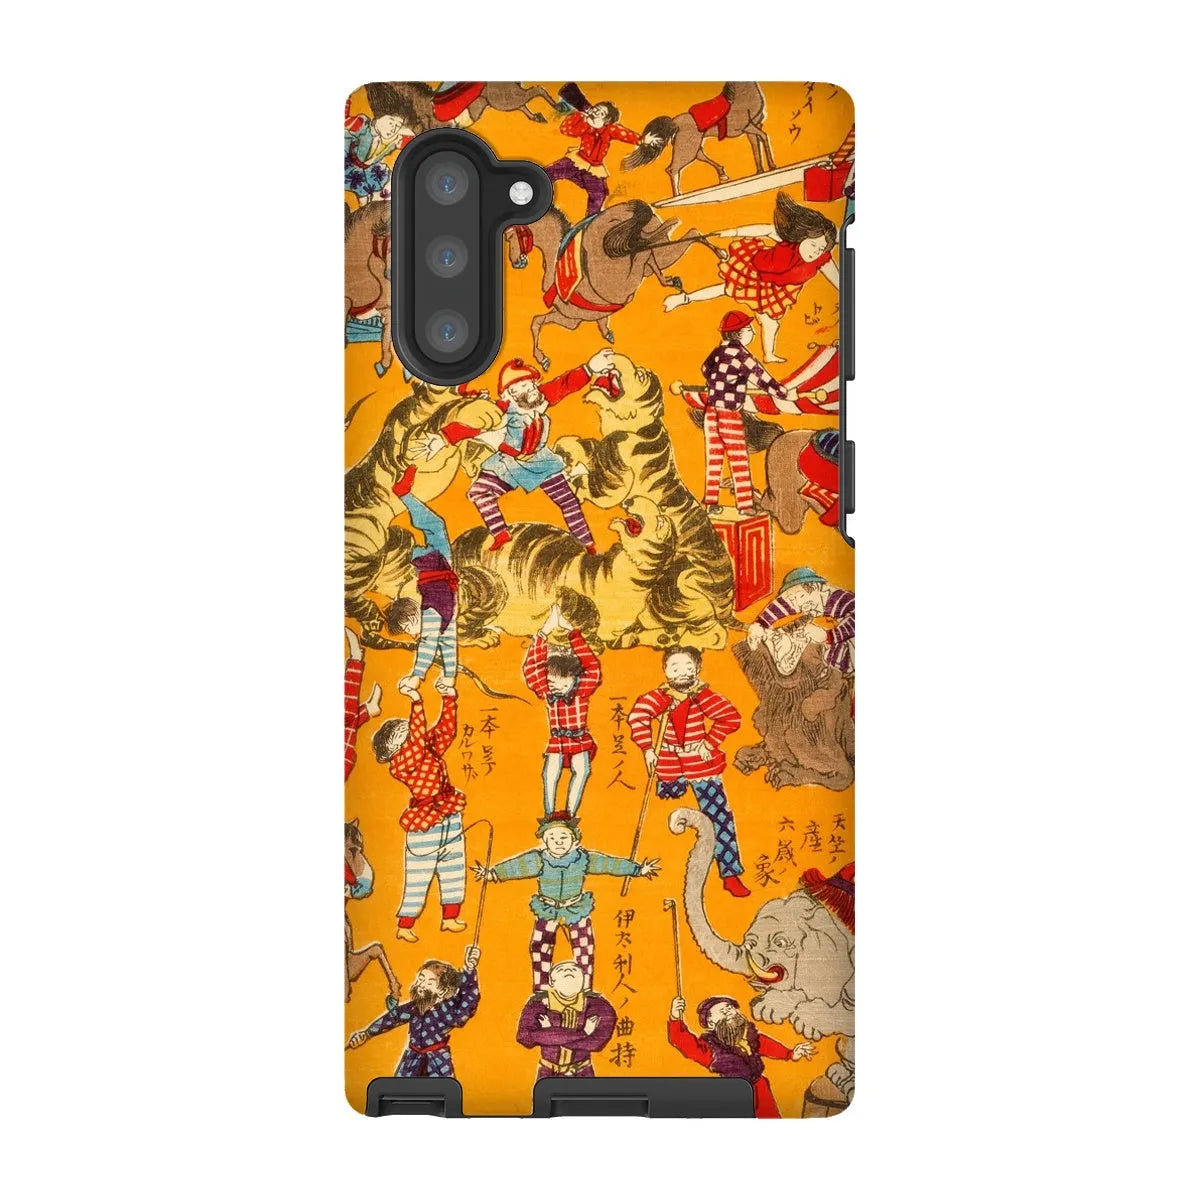 Japanese Circus Aesthetic Art Phone Case - Samsung Galaxy Note 10 / Matte - Mobile Phone Cases - Aesthetic Art